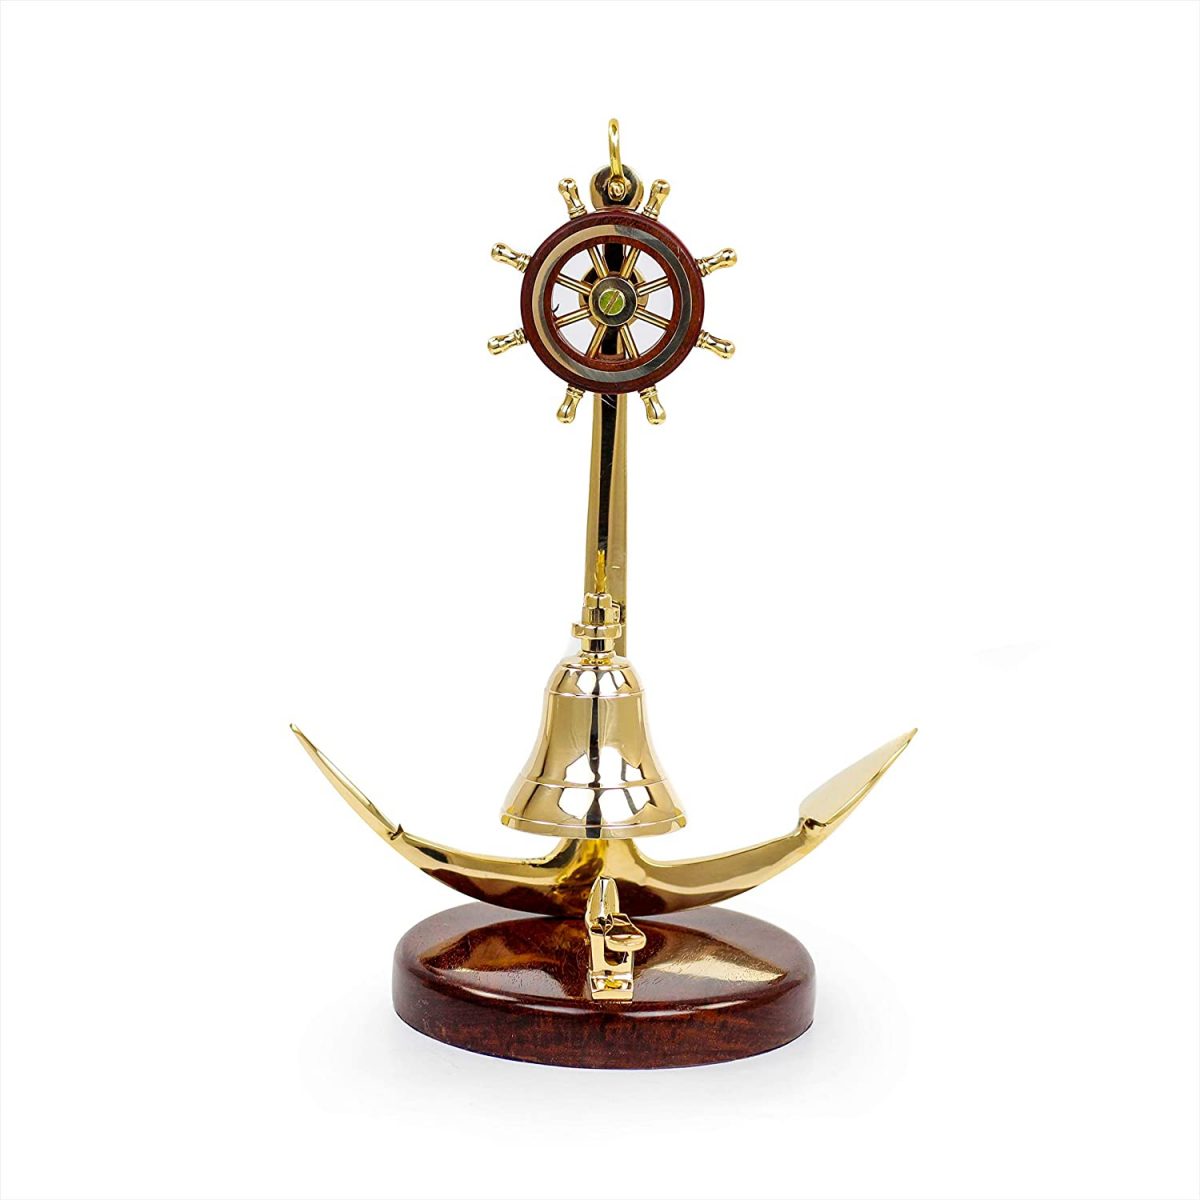 Anchor Studded with Nautical Ship Wheel Mounted Premium Polished Brass Desk Decor Yet Office Call Bell | Innovative New Gifts Ideas for Marine Lifestyle | Nagina International